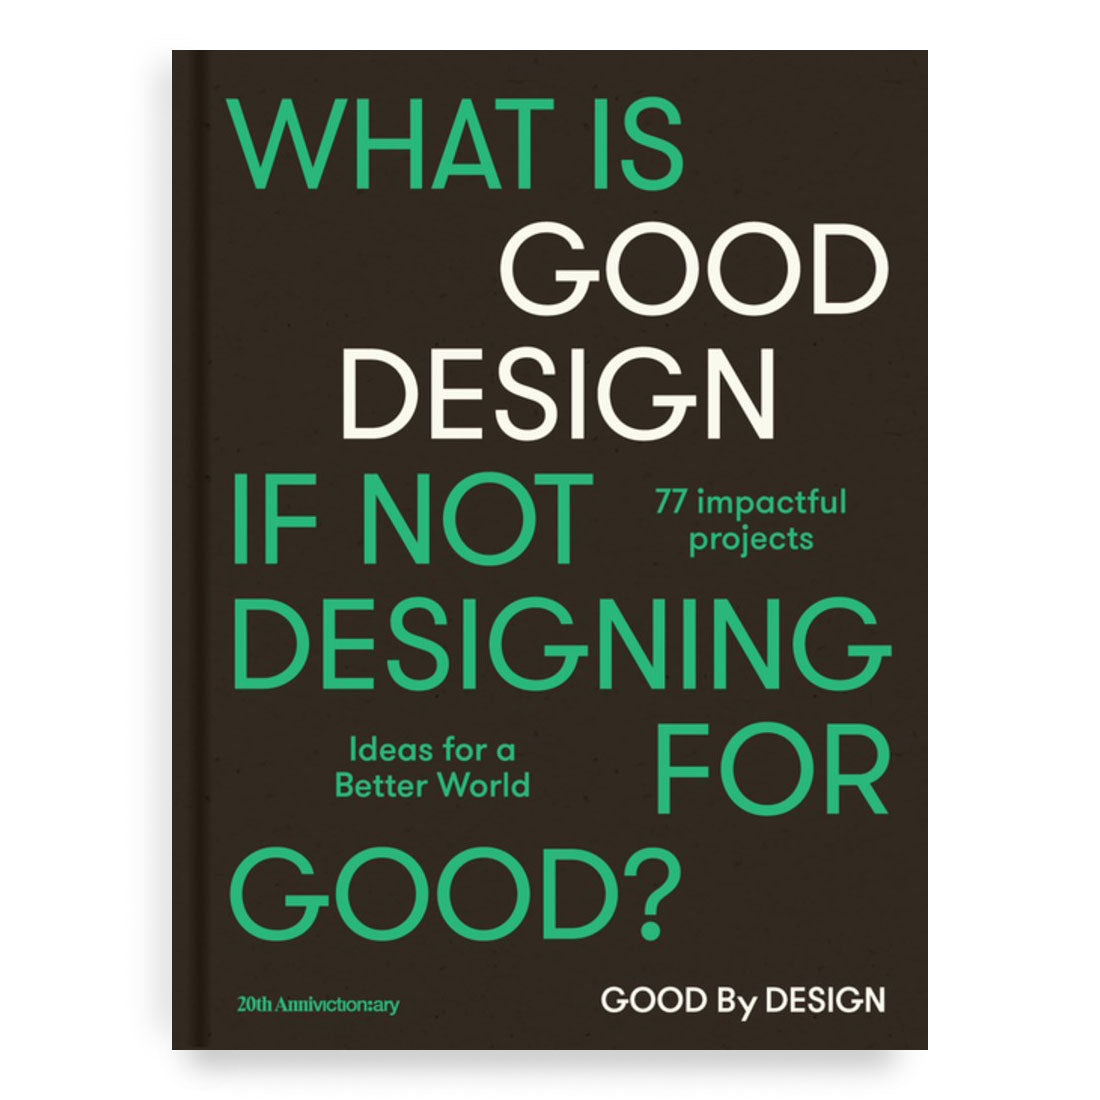 The front cover of Good By Design: Ideas For A Better World.